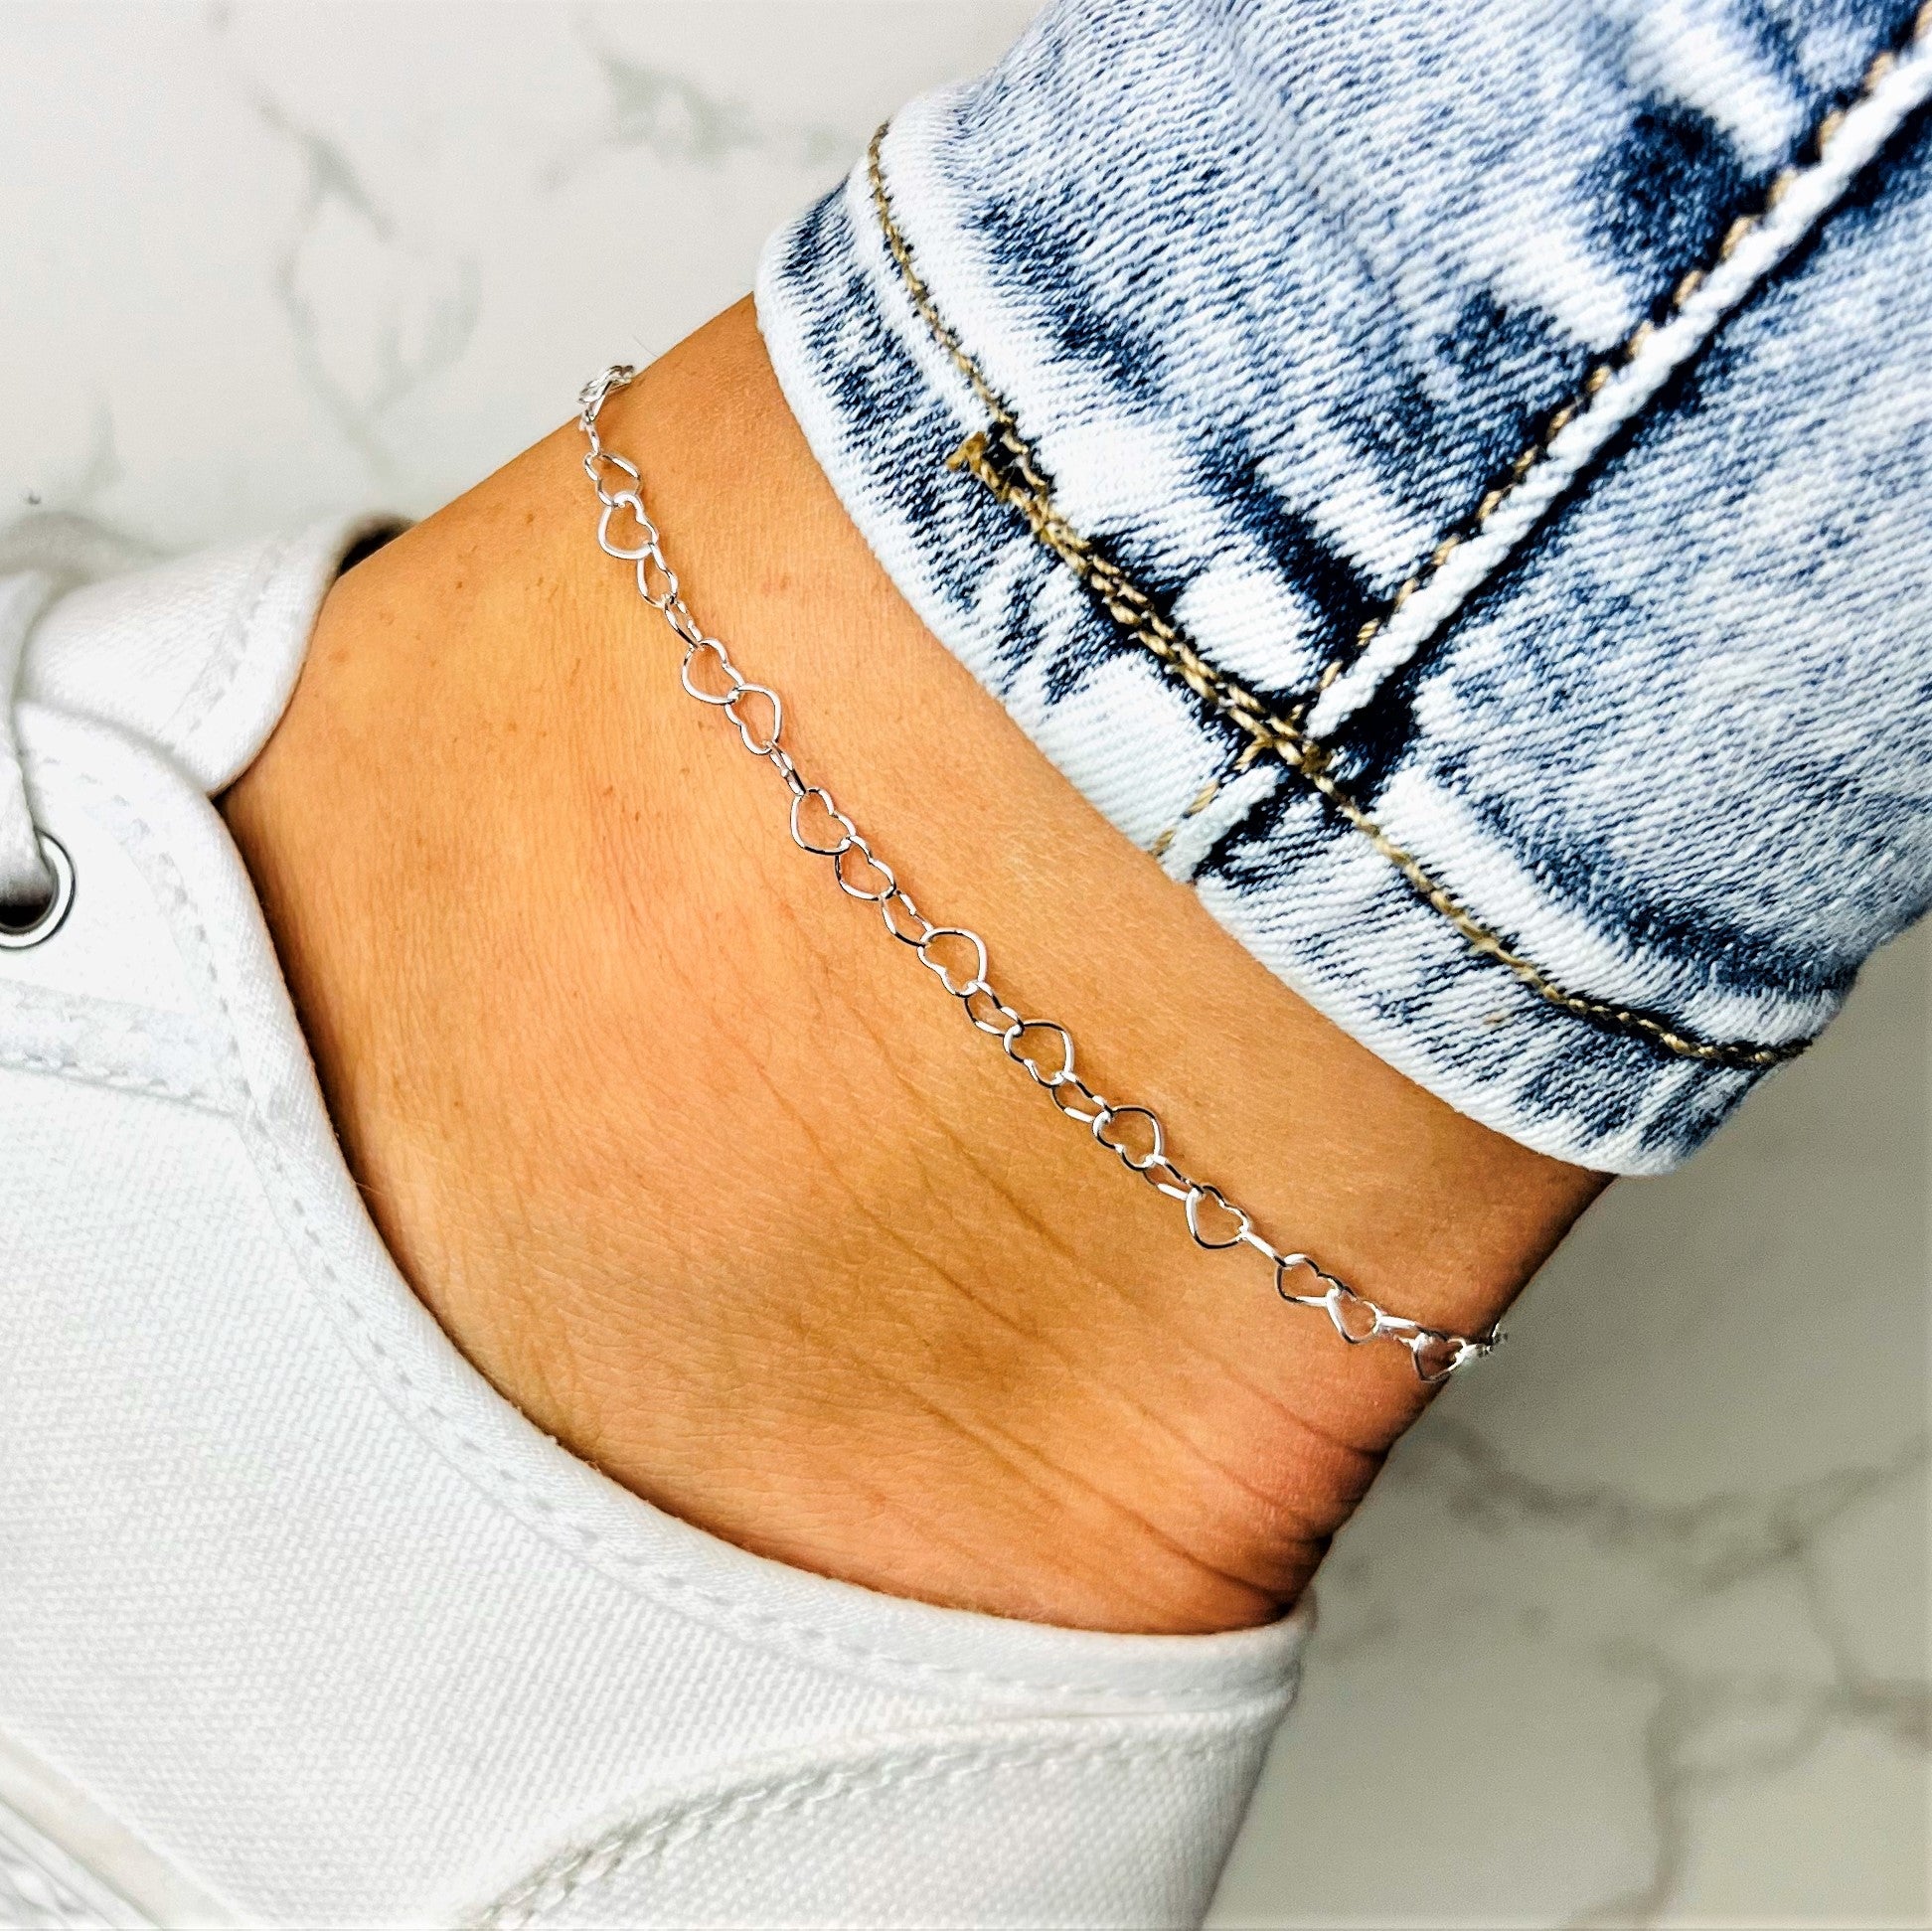 925 Fine Sterling Silver Naturally Adjustable Anklet with Anti Tarnish Coating - 5 mm Heart Chain Ankle Bracelet - GA-ANK3